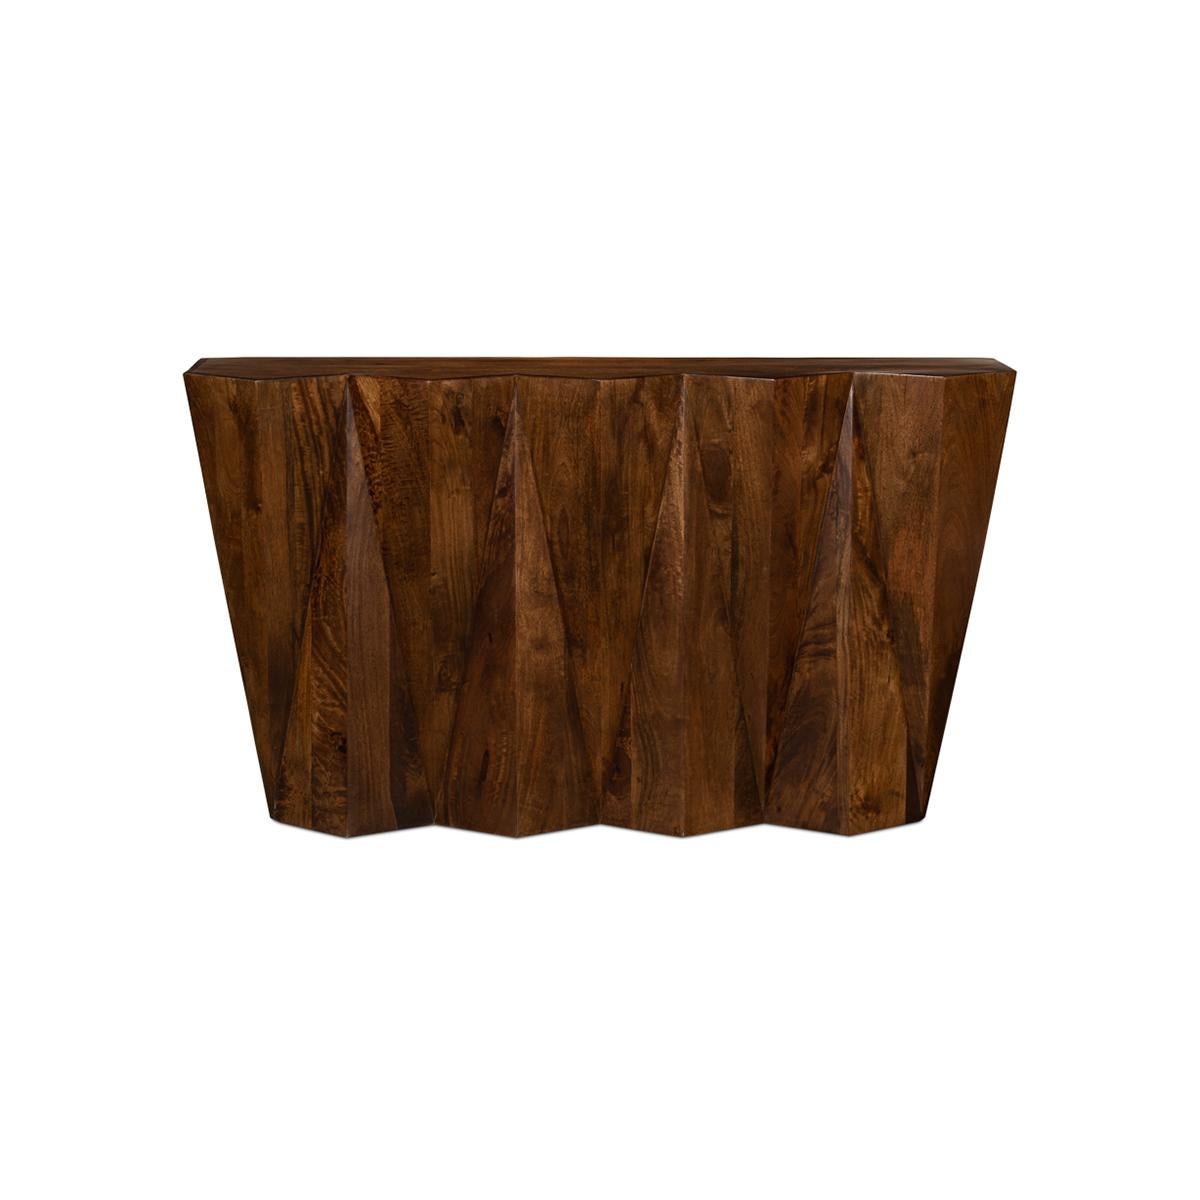 In a natural brown polished finish with intricate 3D geometric design.

Dimensions: 64